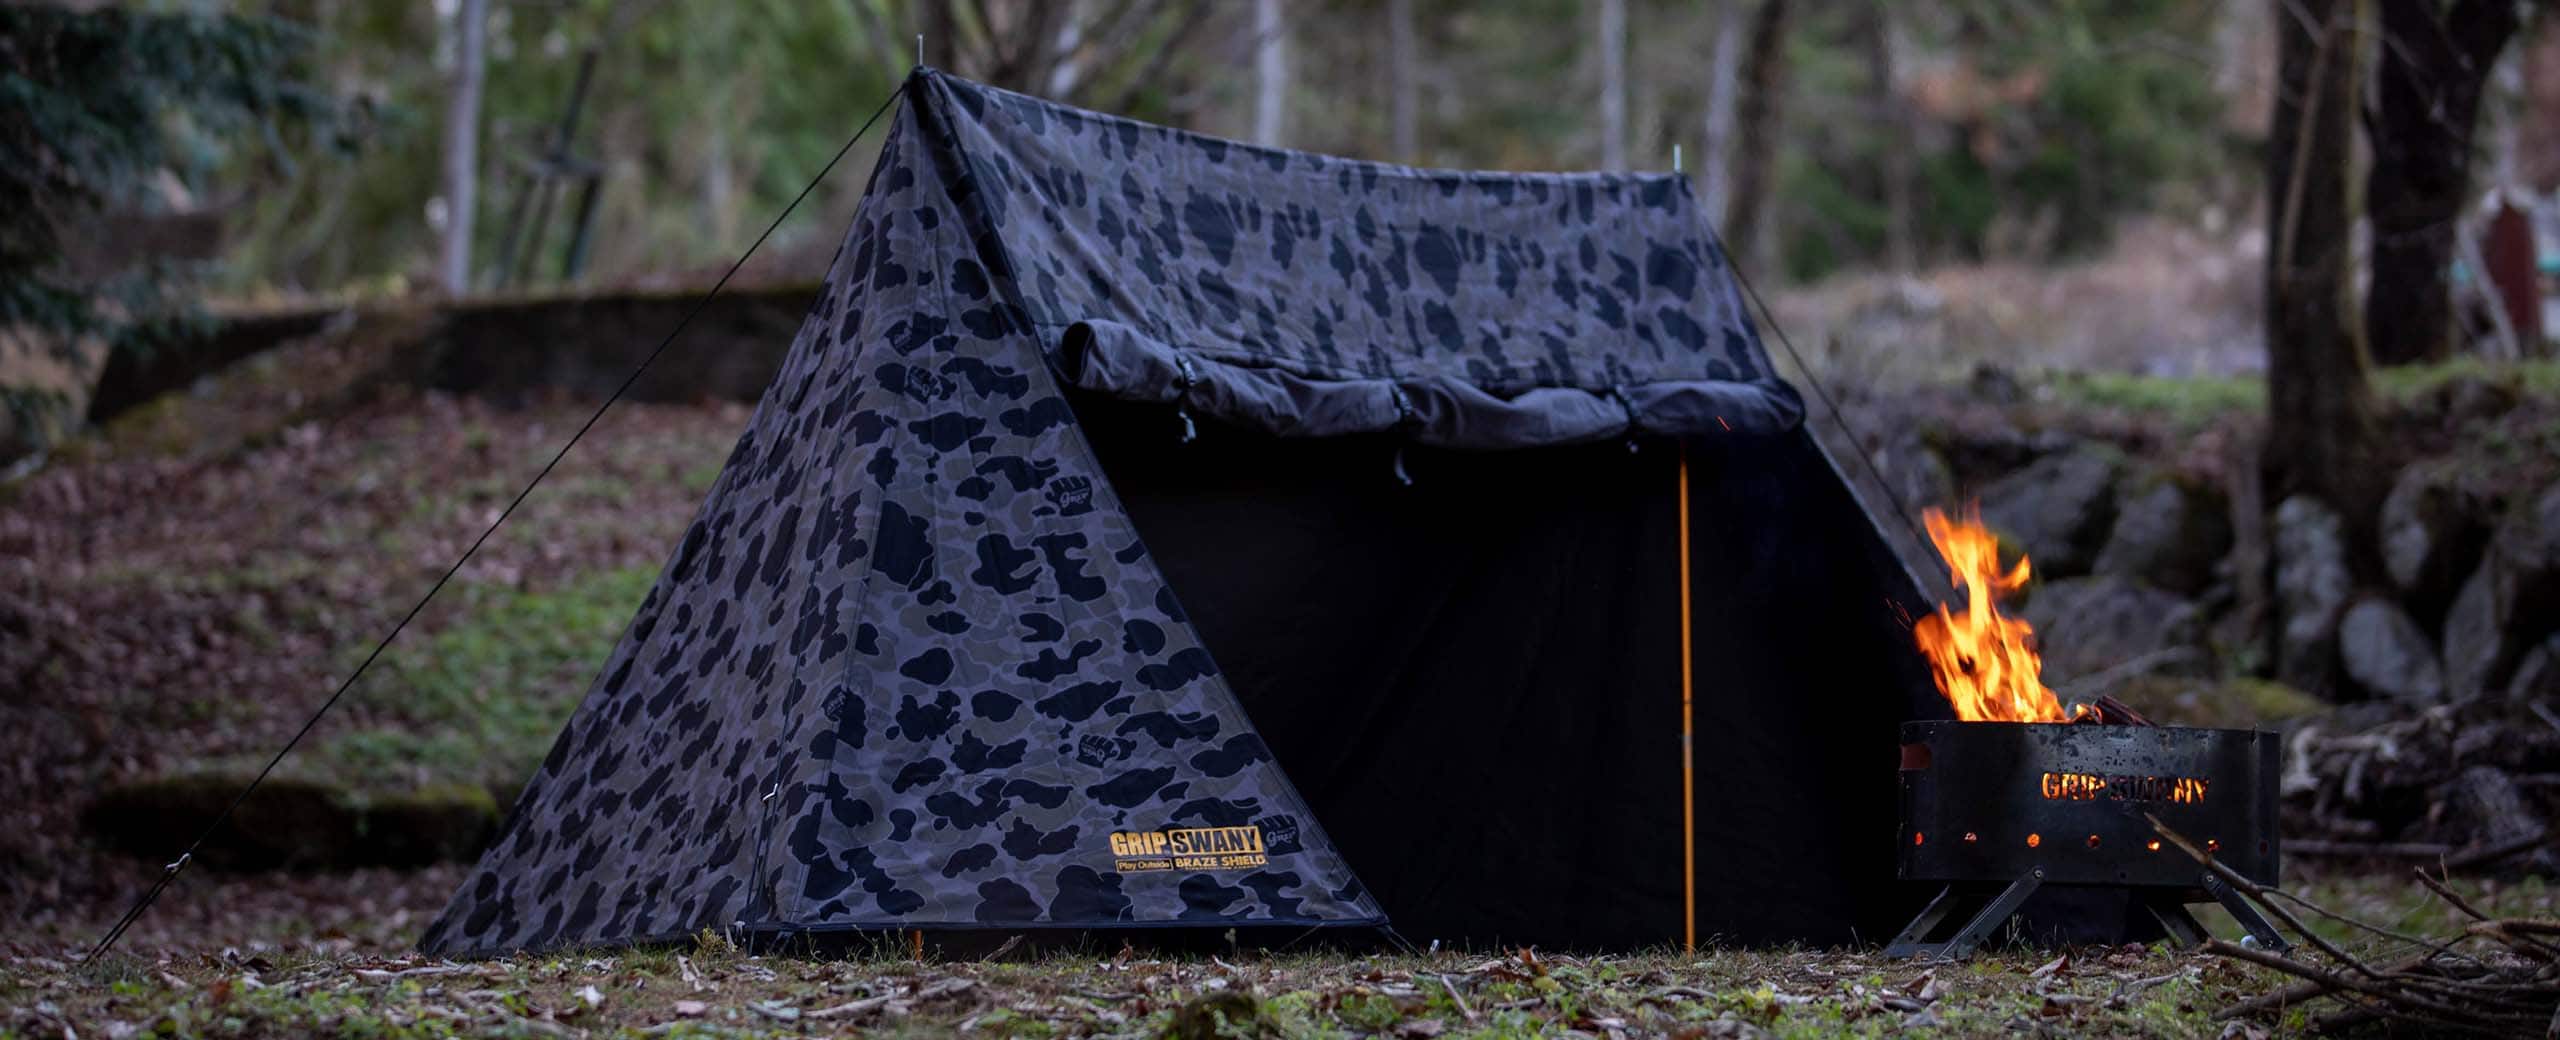 GRIP SWANY×atmos FIREPROOF GS TENT